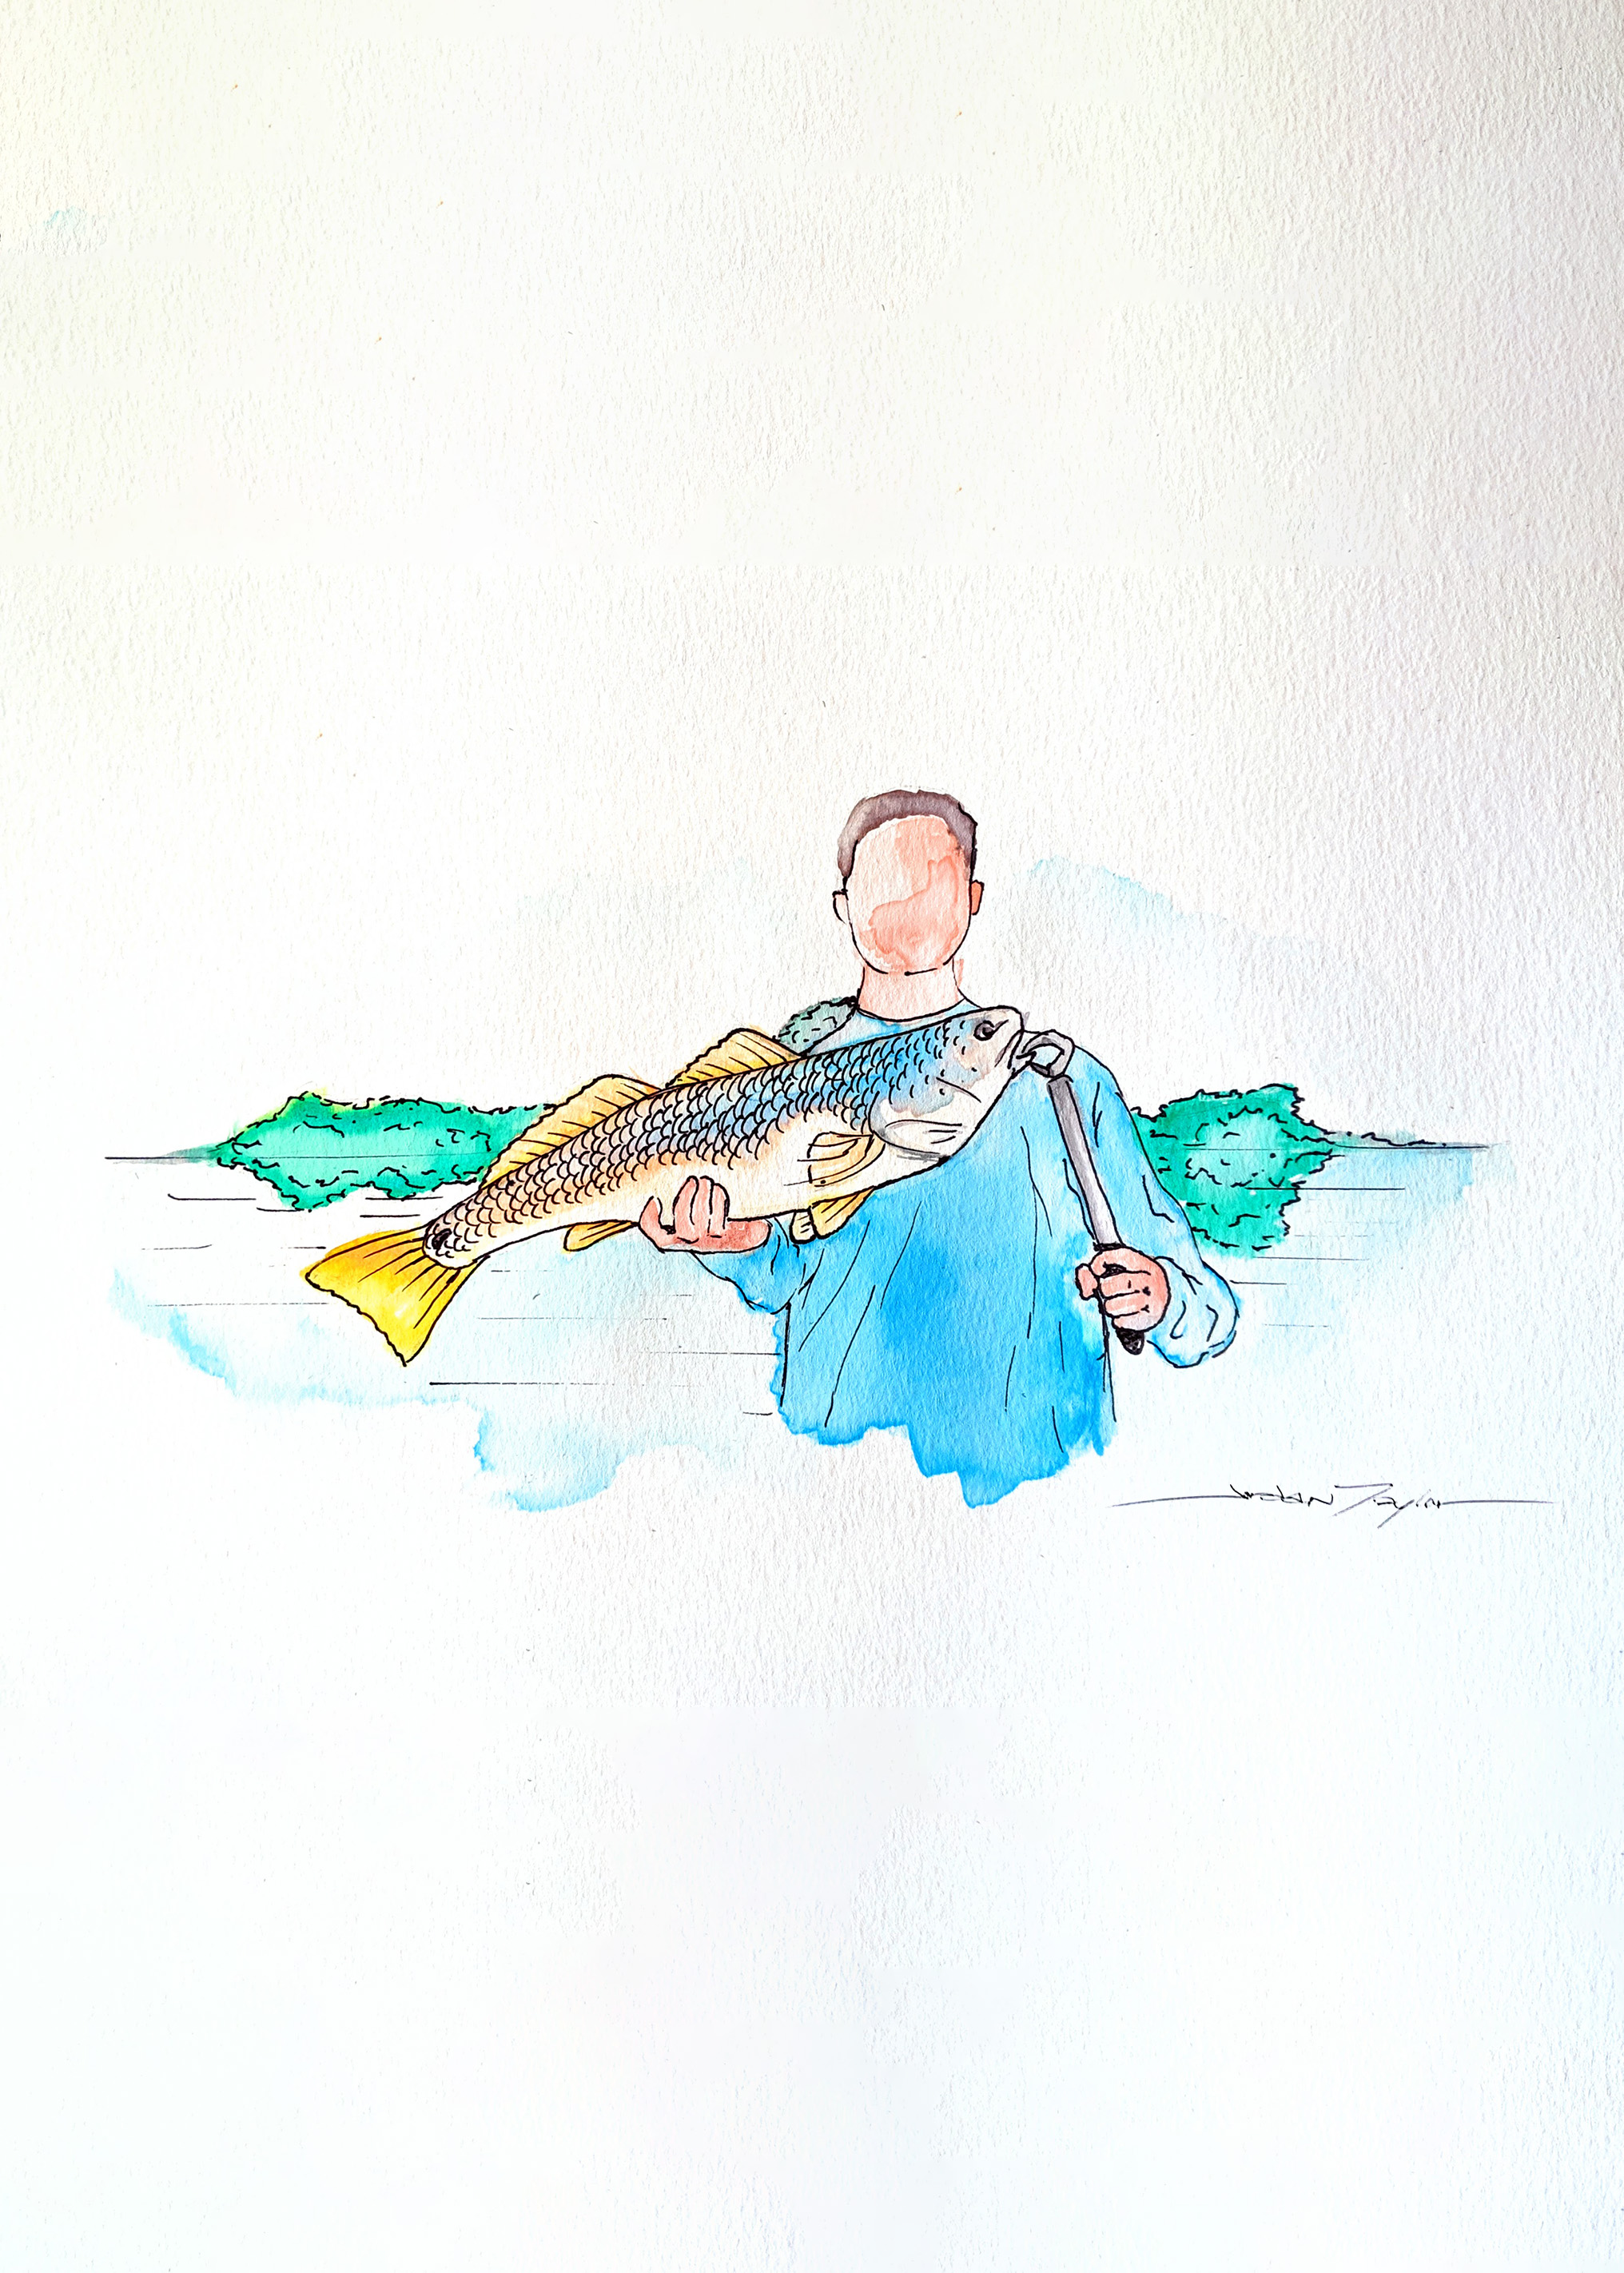 A watercolor of a faceless man holding a red drum fish